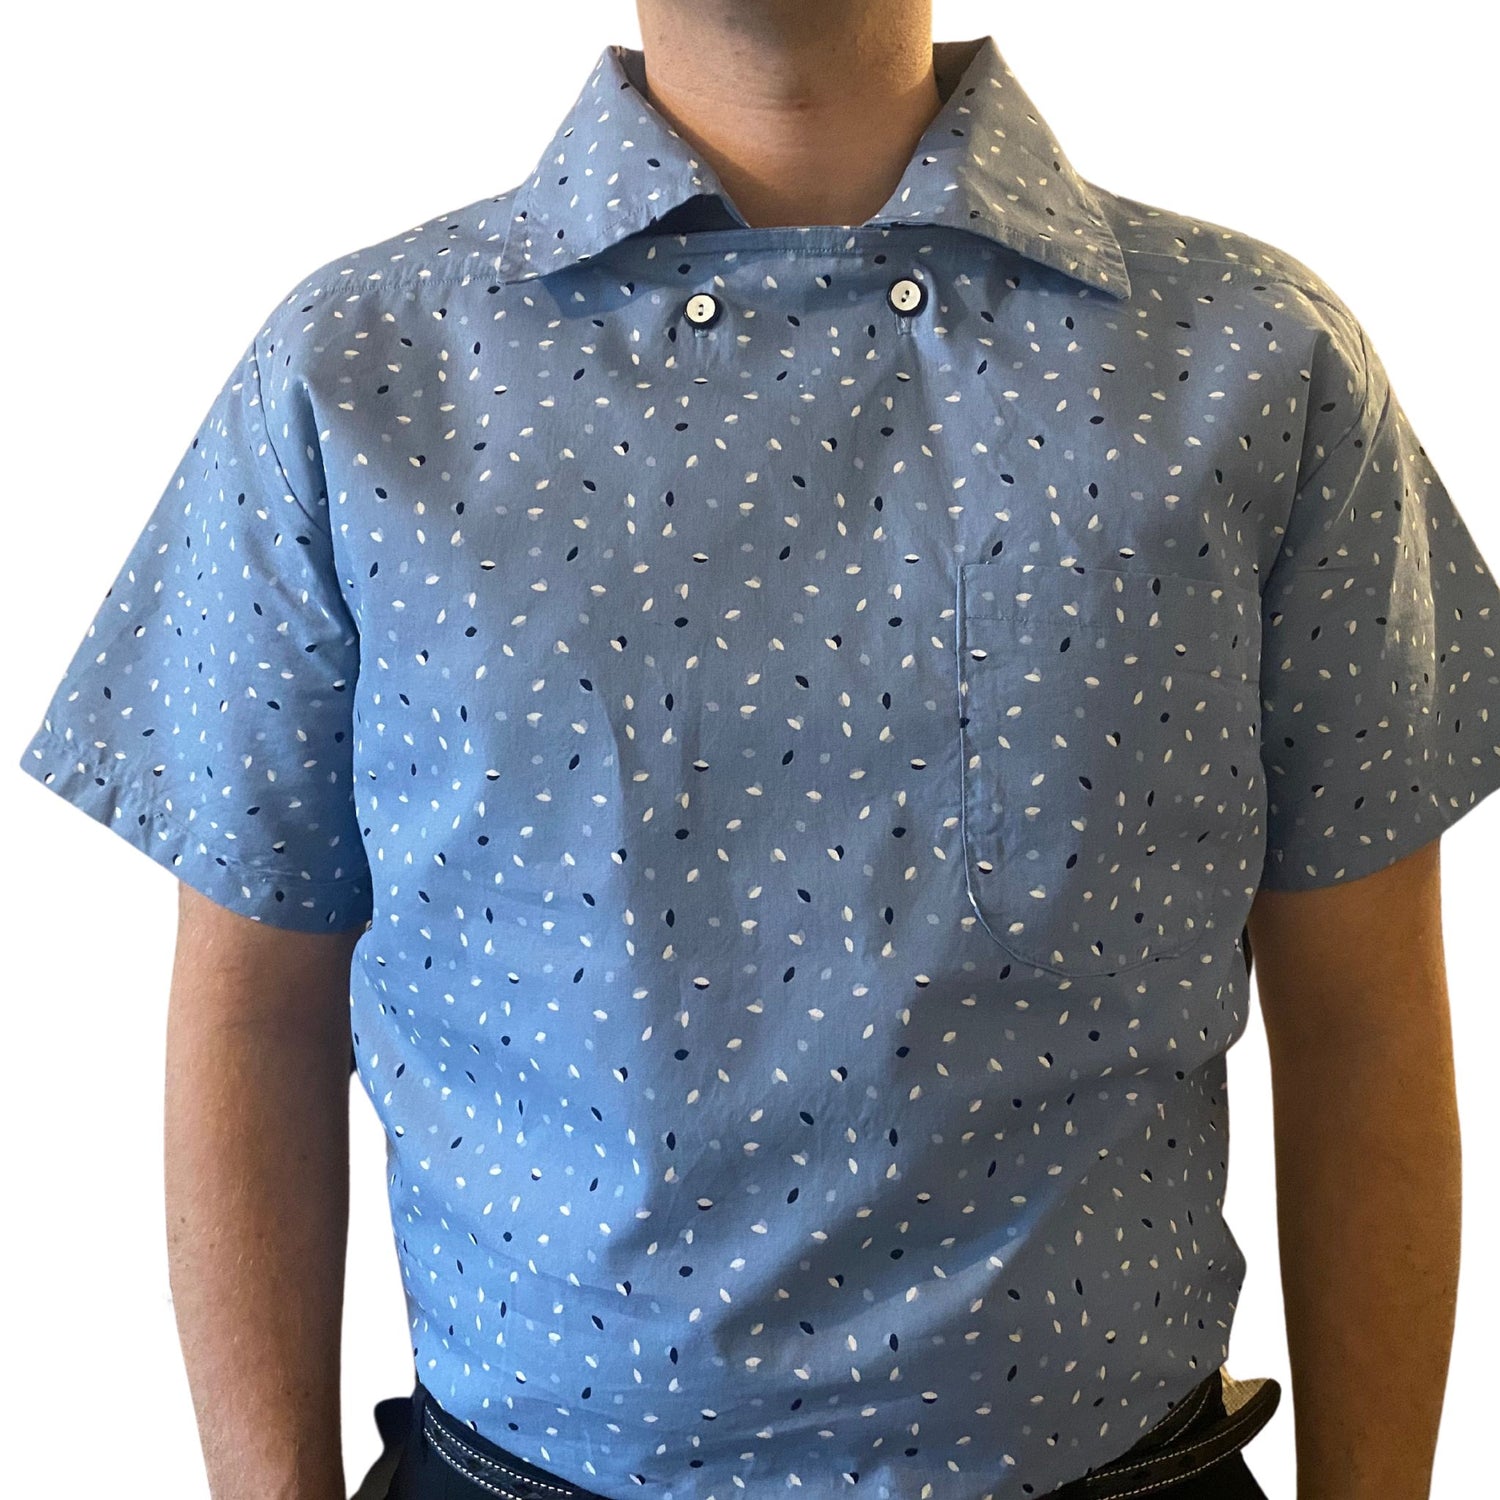 Man wearing blue 1950s sports shirtt with white and blue fleck print. Shirt has collar and two button neck fastening with short sleeves and chest pocket.